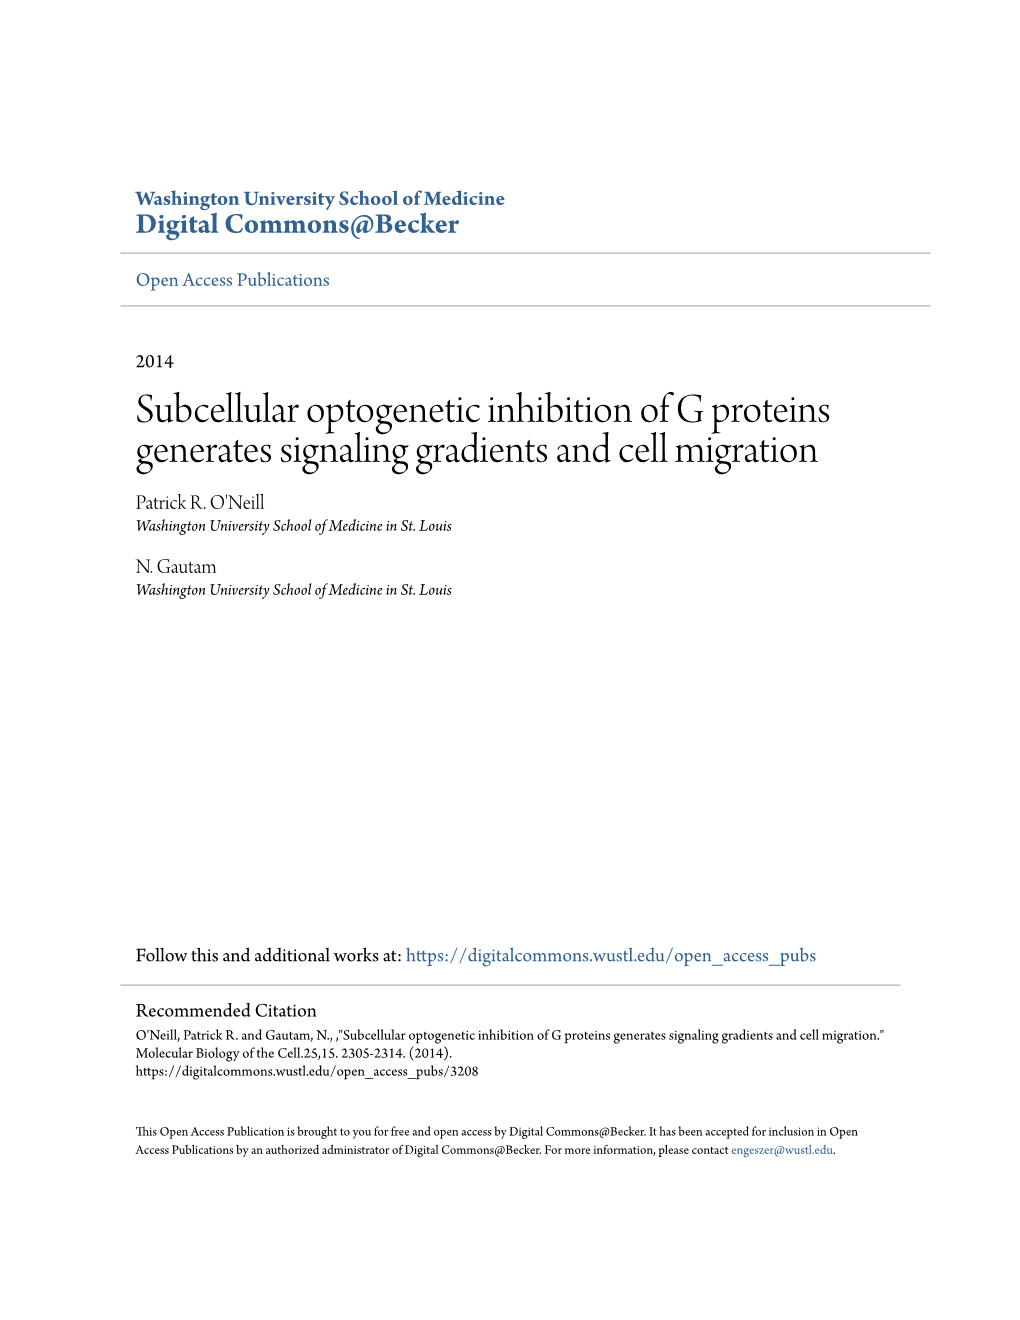 Subcellular Optogenetic Inhibition of G Proteins Generates Signaling Gradients and Cell Migration Patrick R